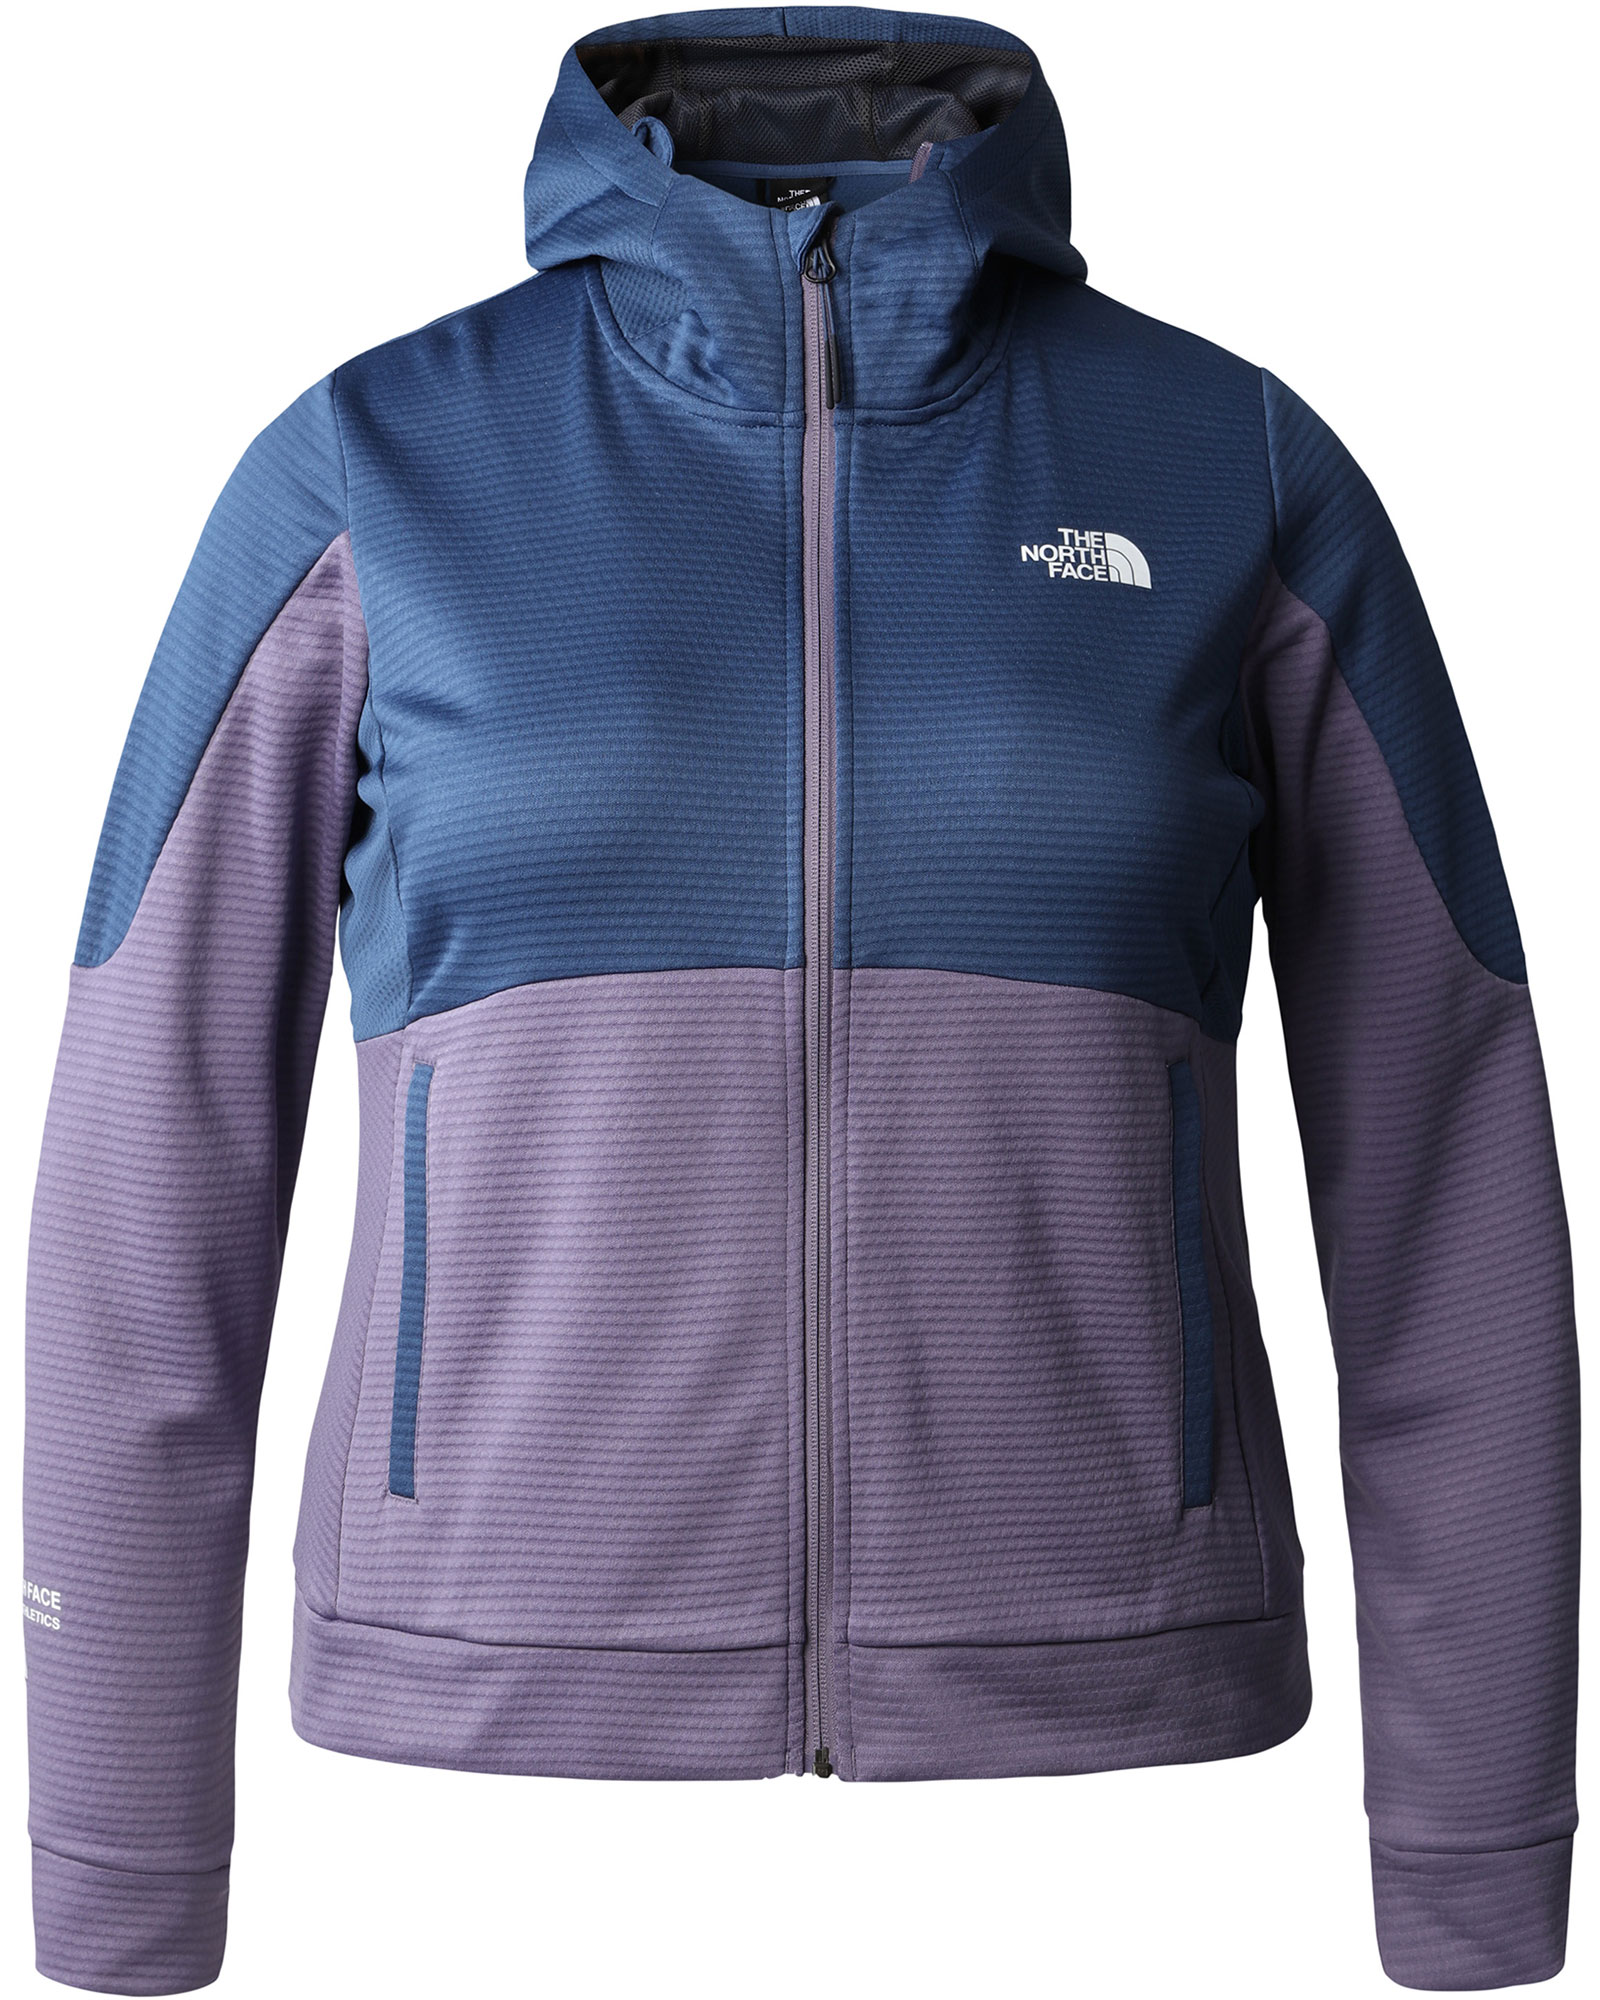 The North Face Womens Plus Ma Full Zip Fleece